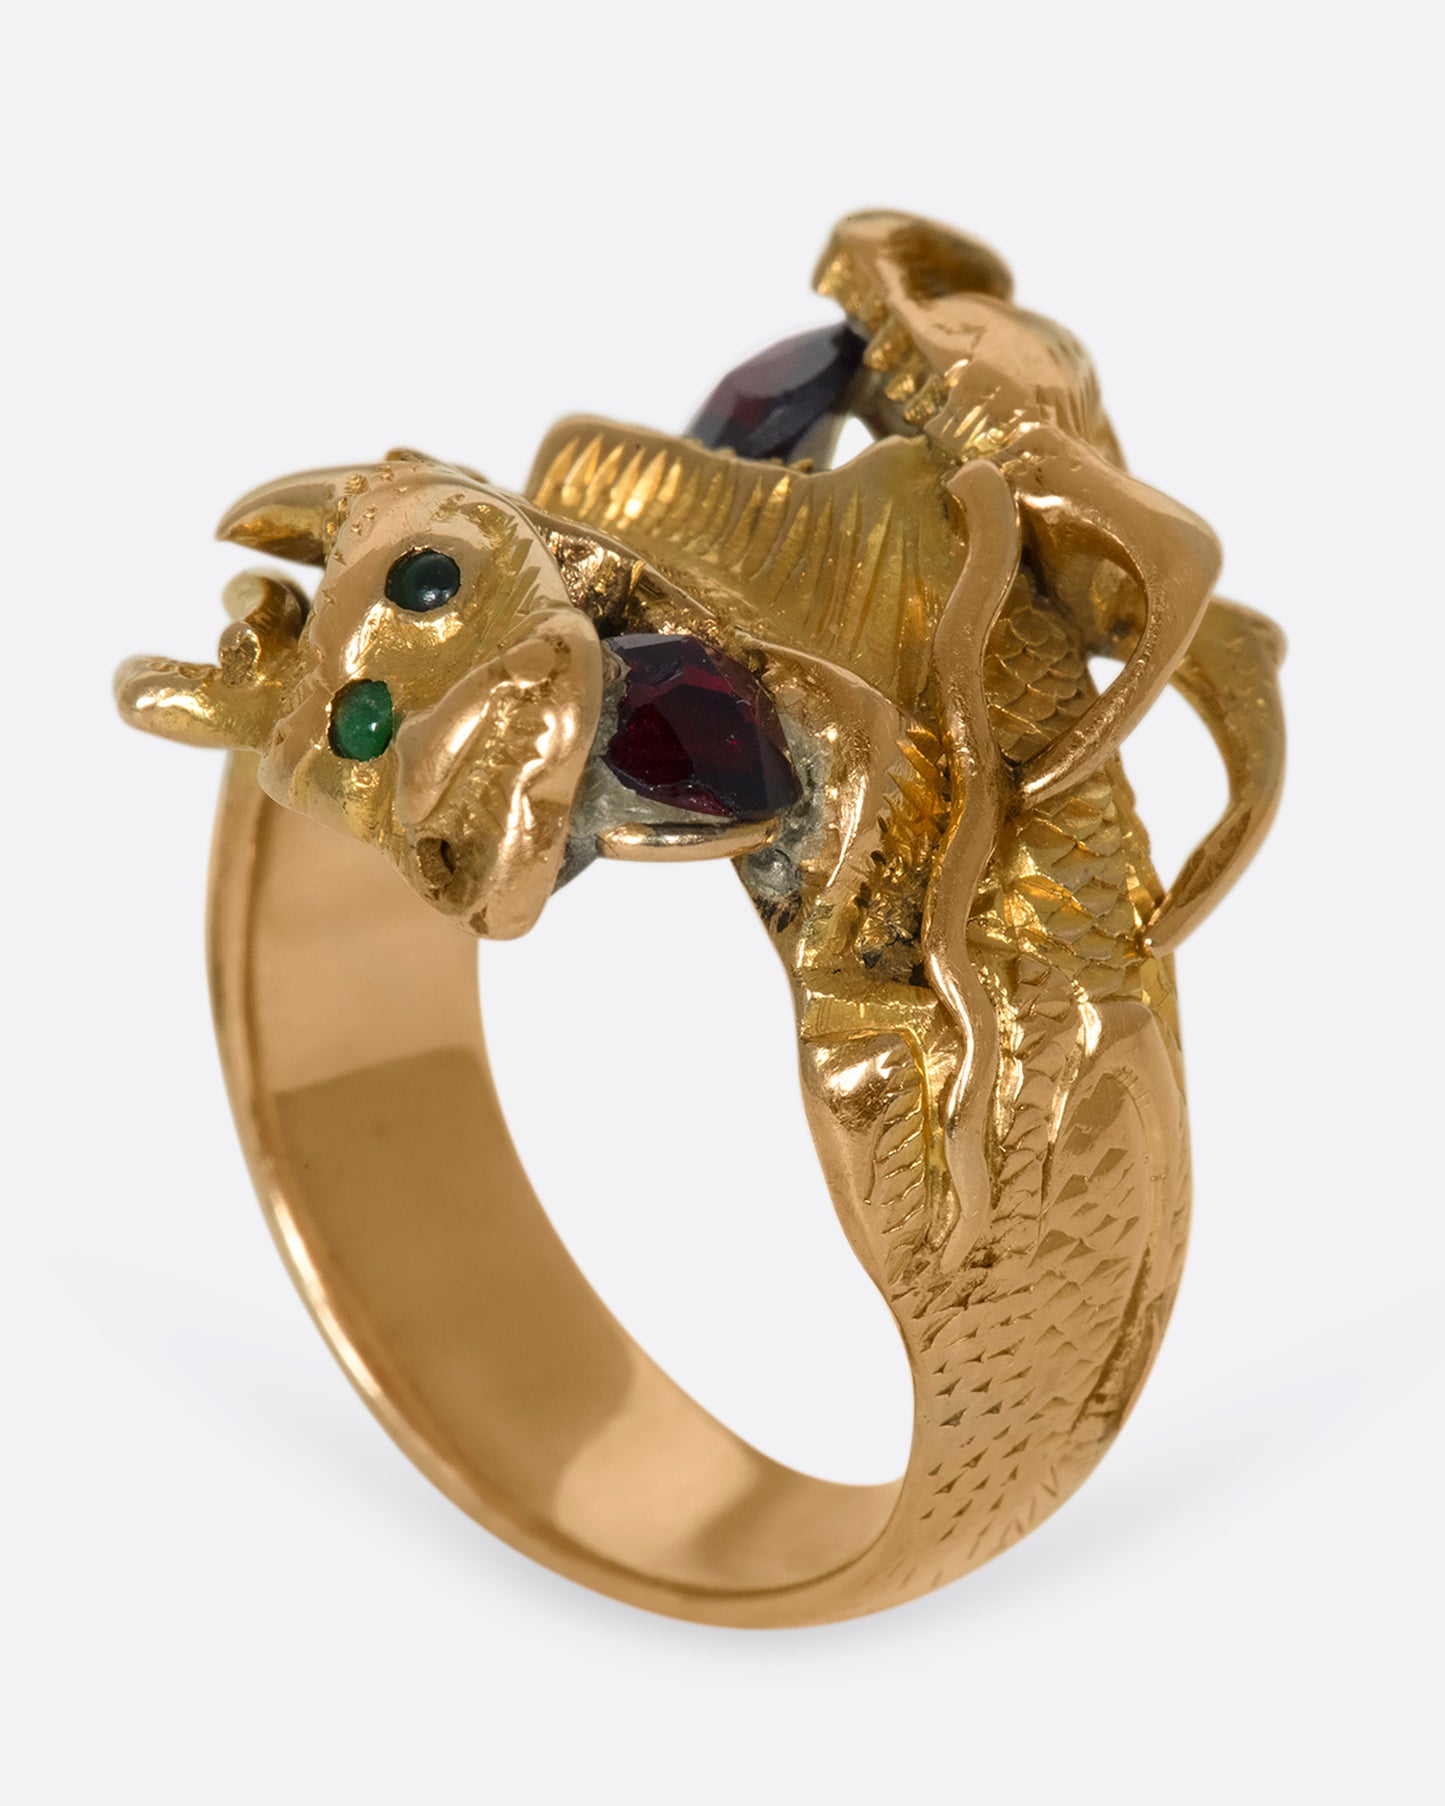 A view of a yellow gold ring with two wrapped dragons, each with emerald eyes and garnets in their mouths standing on its band.